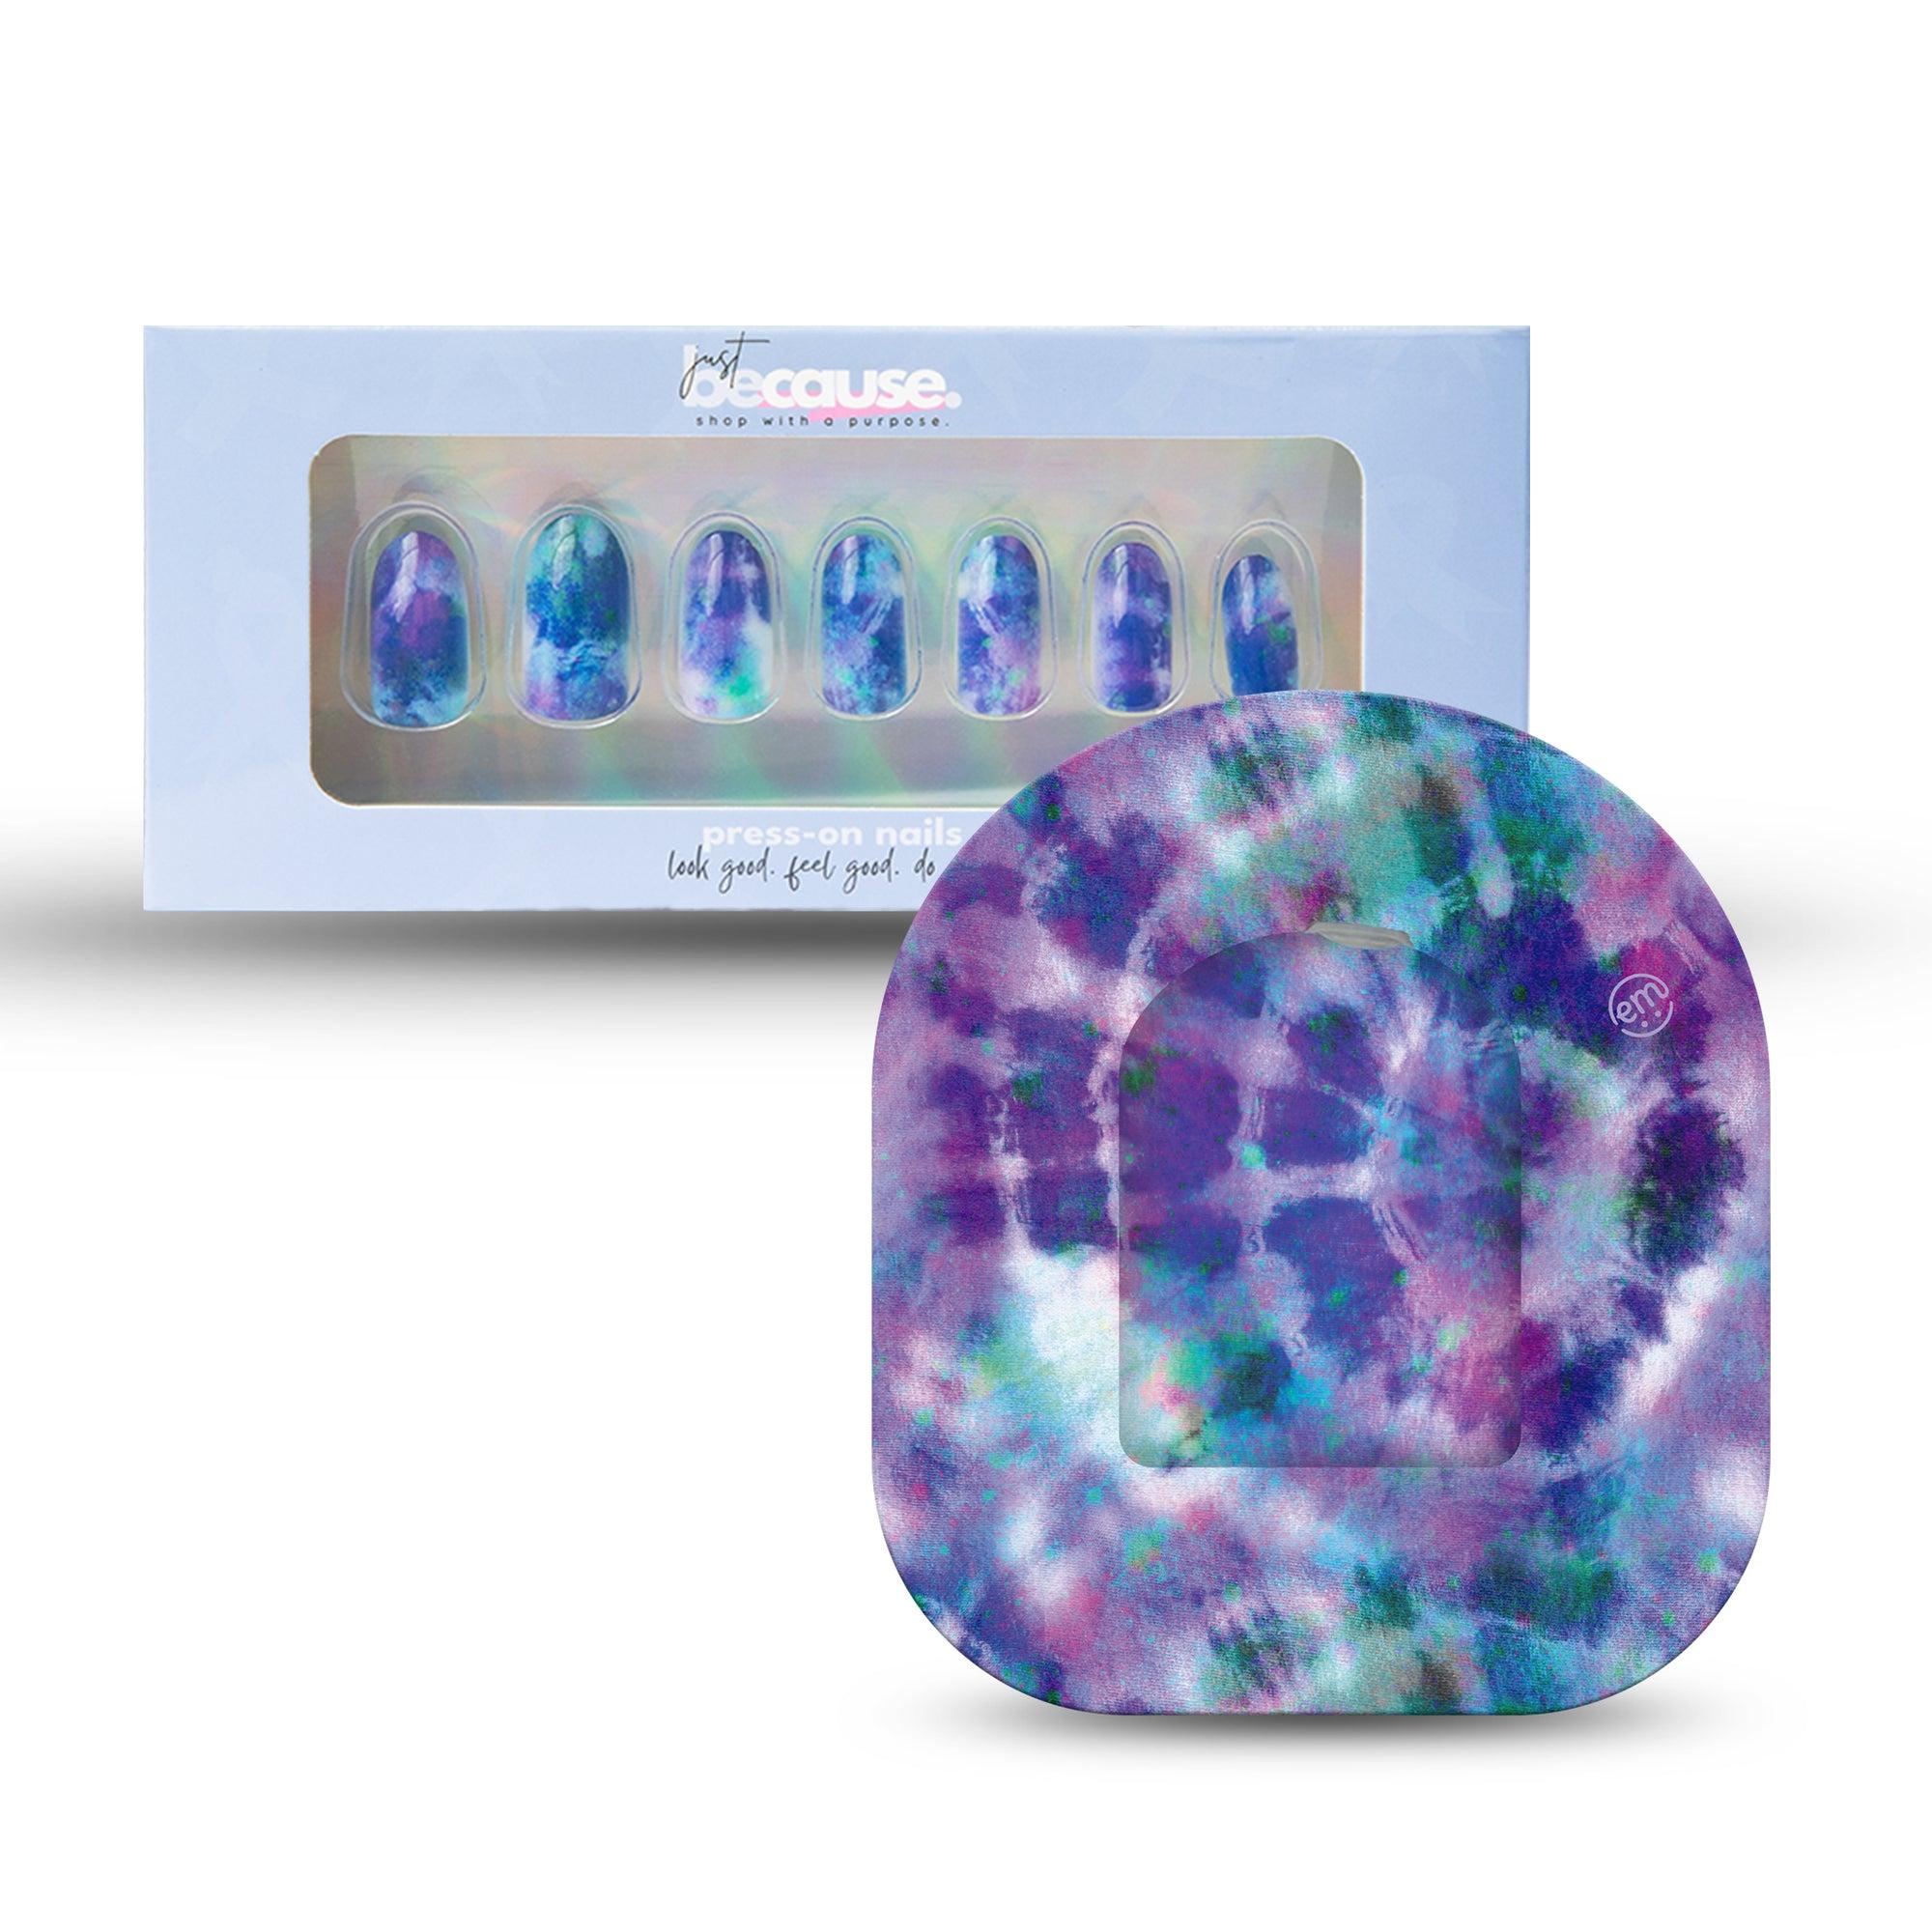 ExpressionMed Just BeCause 24 Pcs ABS Press on nails Medium, Purple and Blue Tie Dye Fake Nails set with matching Purple Tie Dye Infusion Set Fixing Ring, Support T1D - ExpressionMed.com	